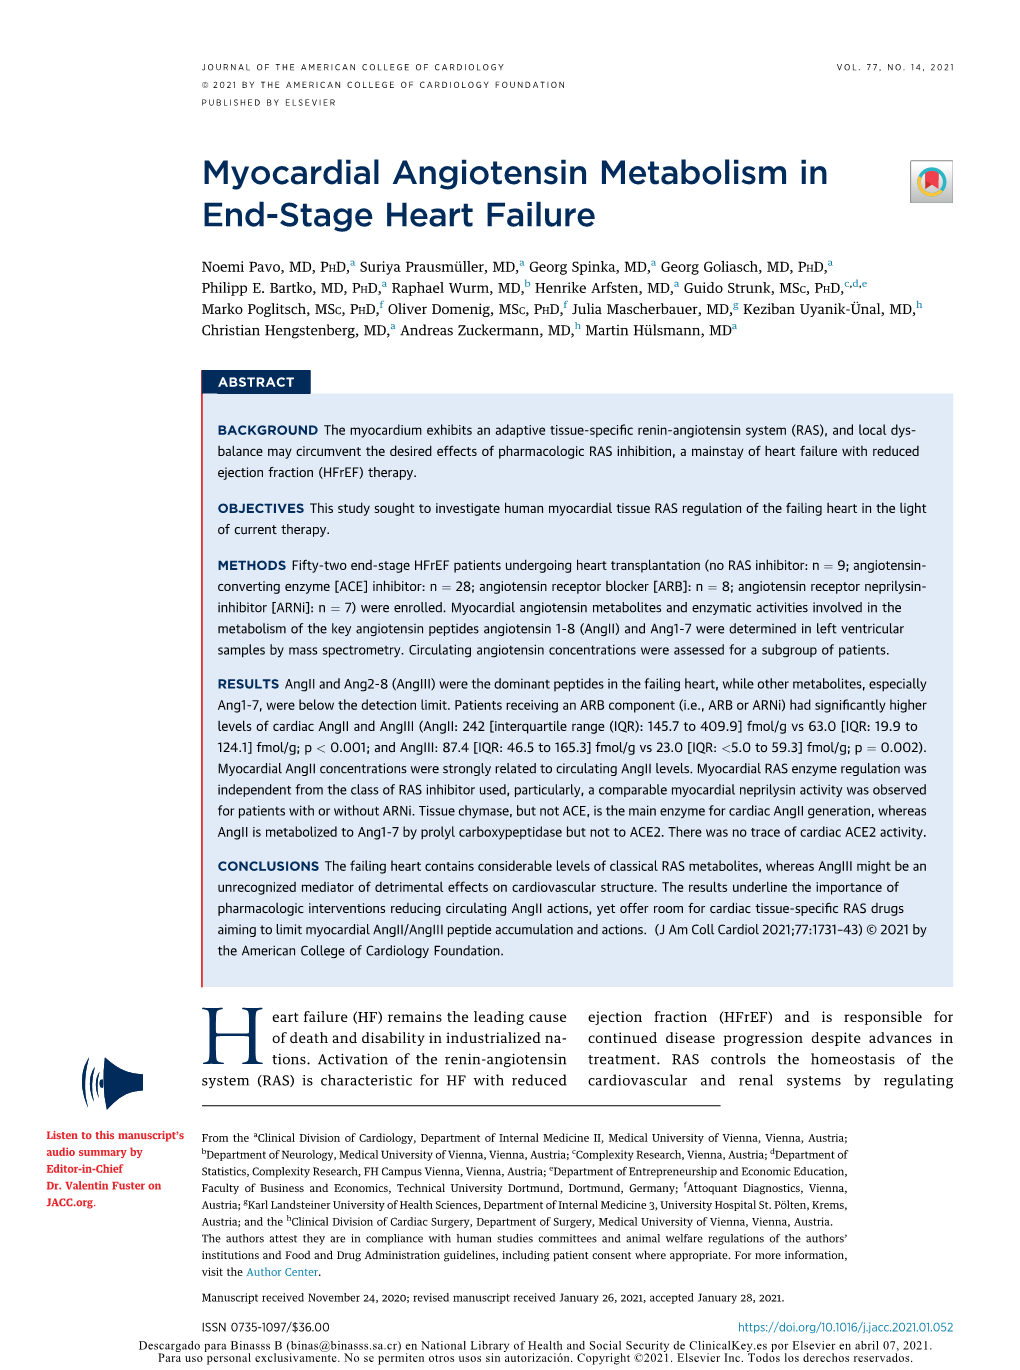 Myocardial Angiotensin Metabolism in End-Stage Heart Failure